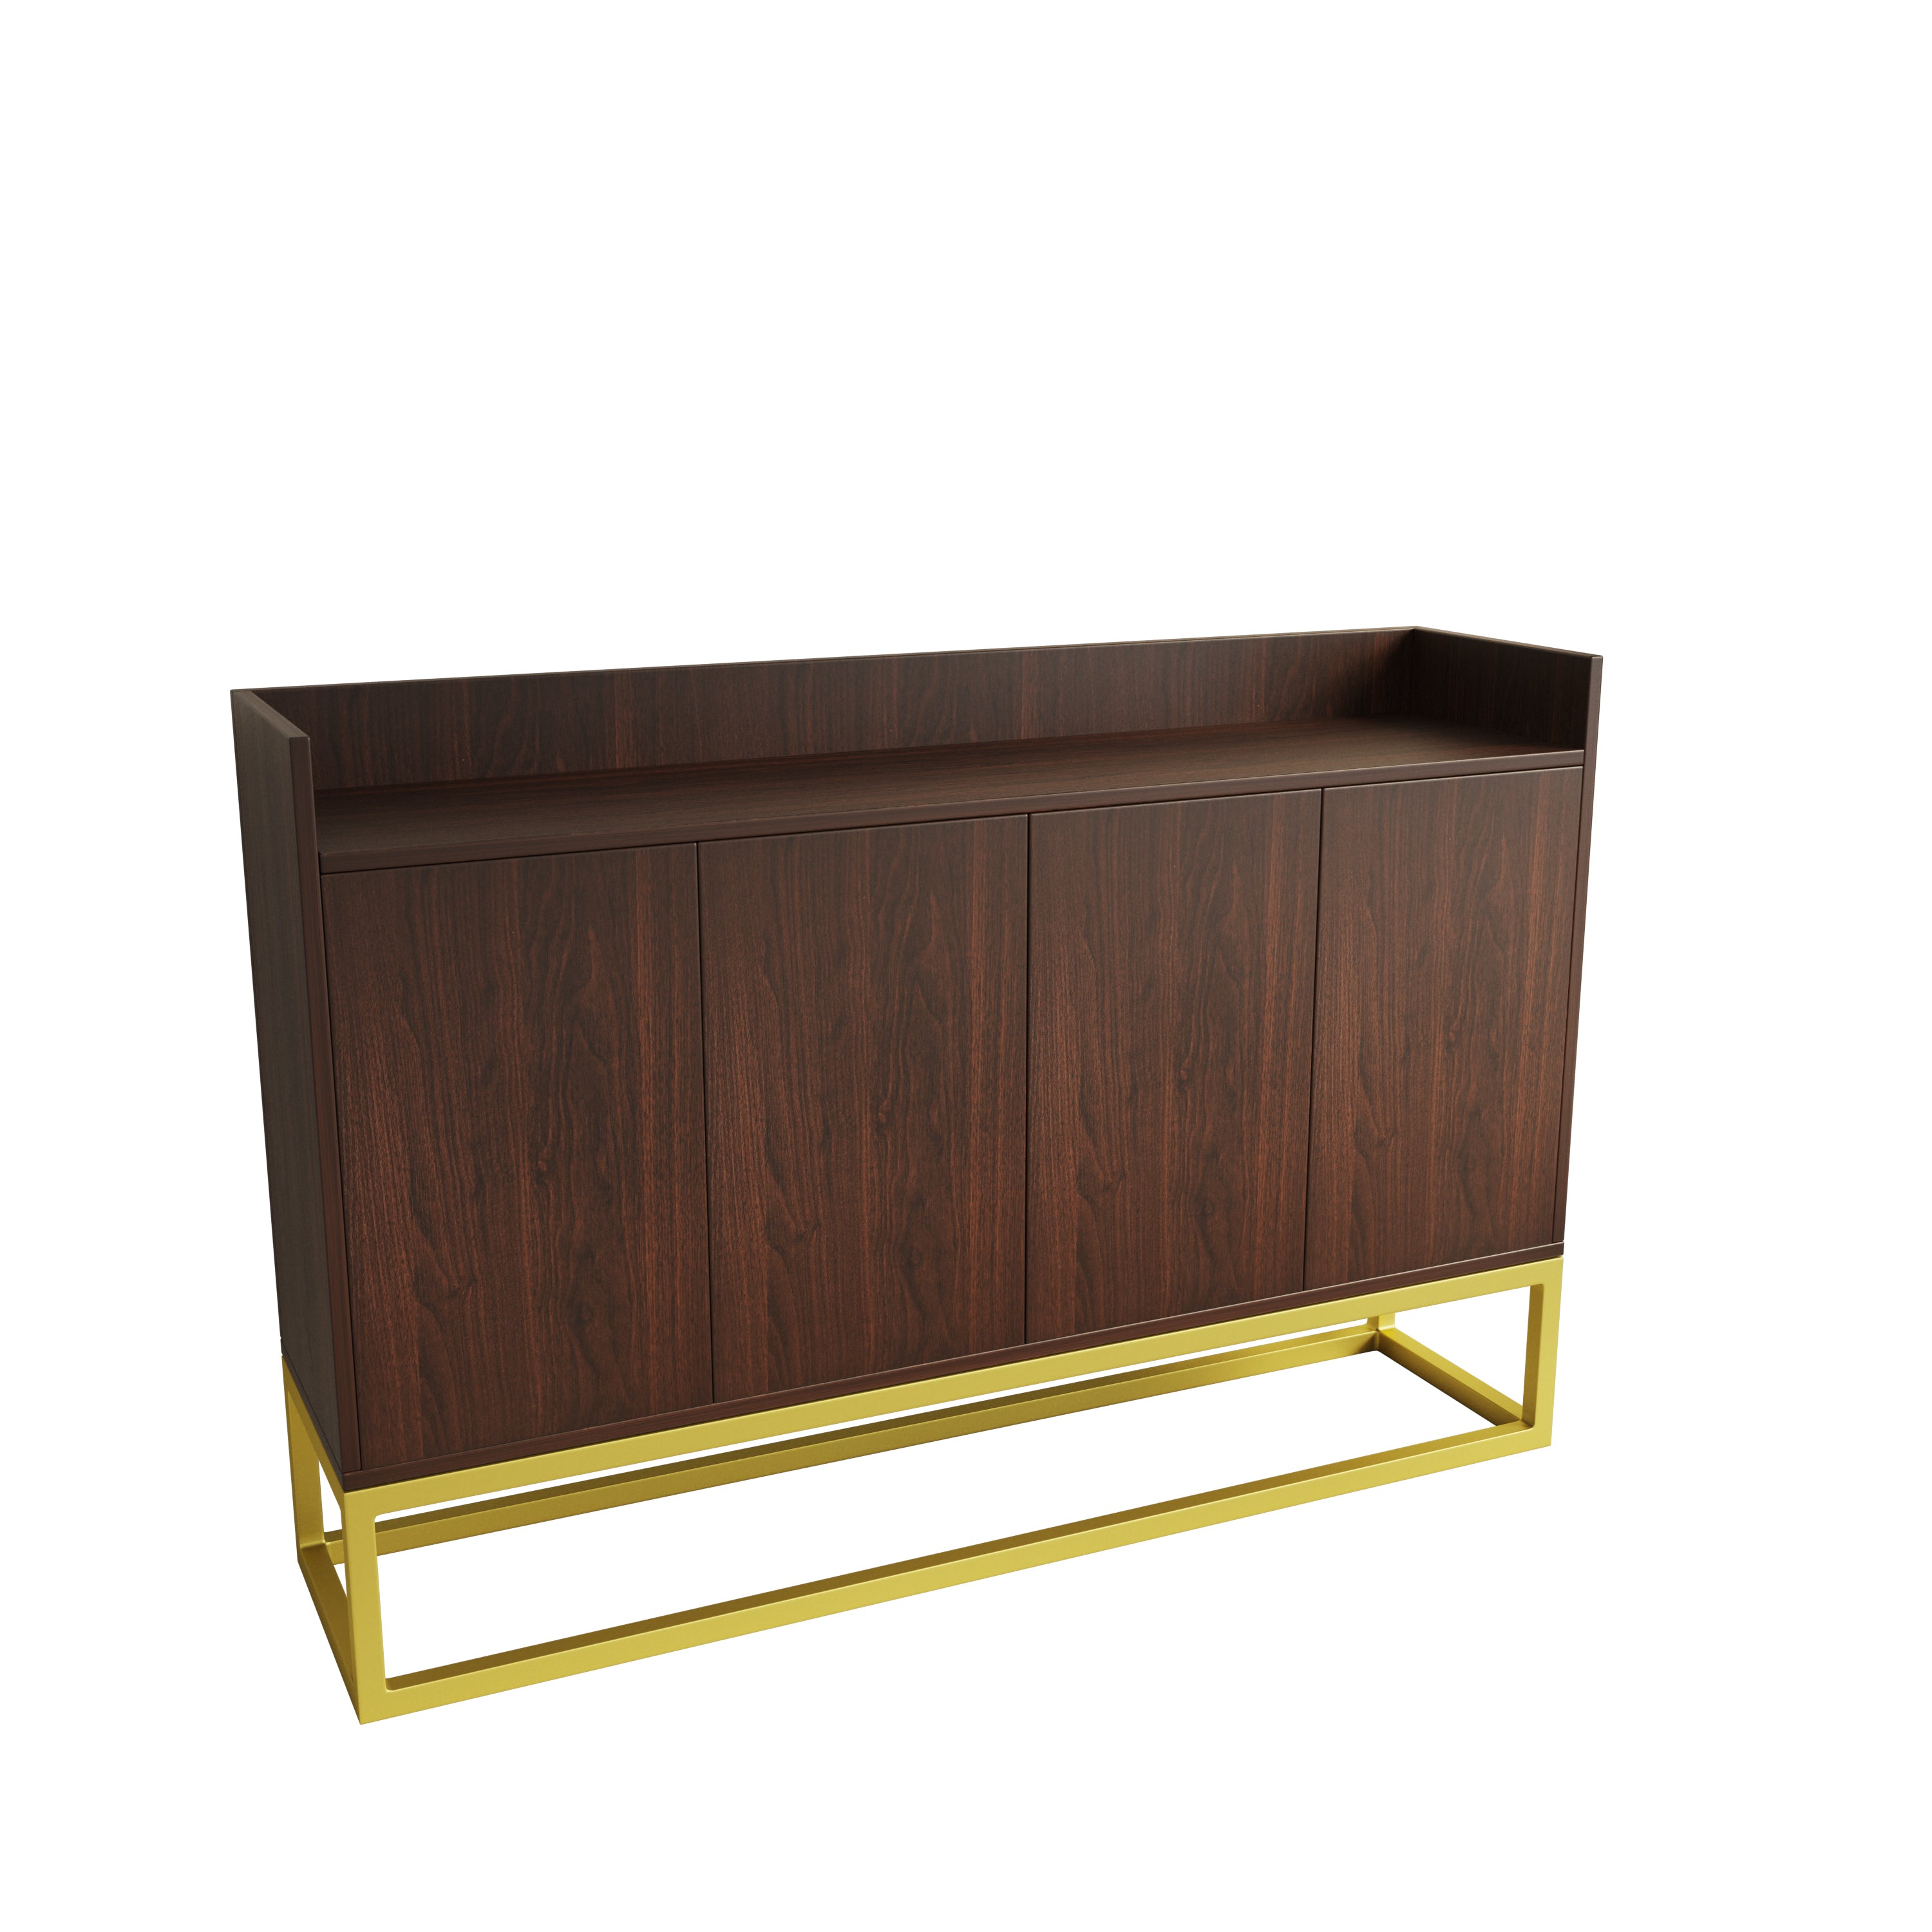 Stylish and Functional 4-Door Storage Cabinet with Square Metal Legs and Particle Board Material - Walnut